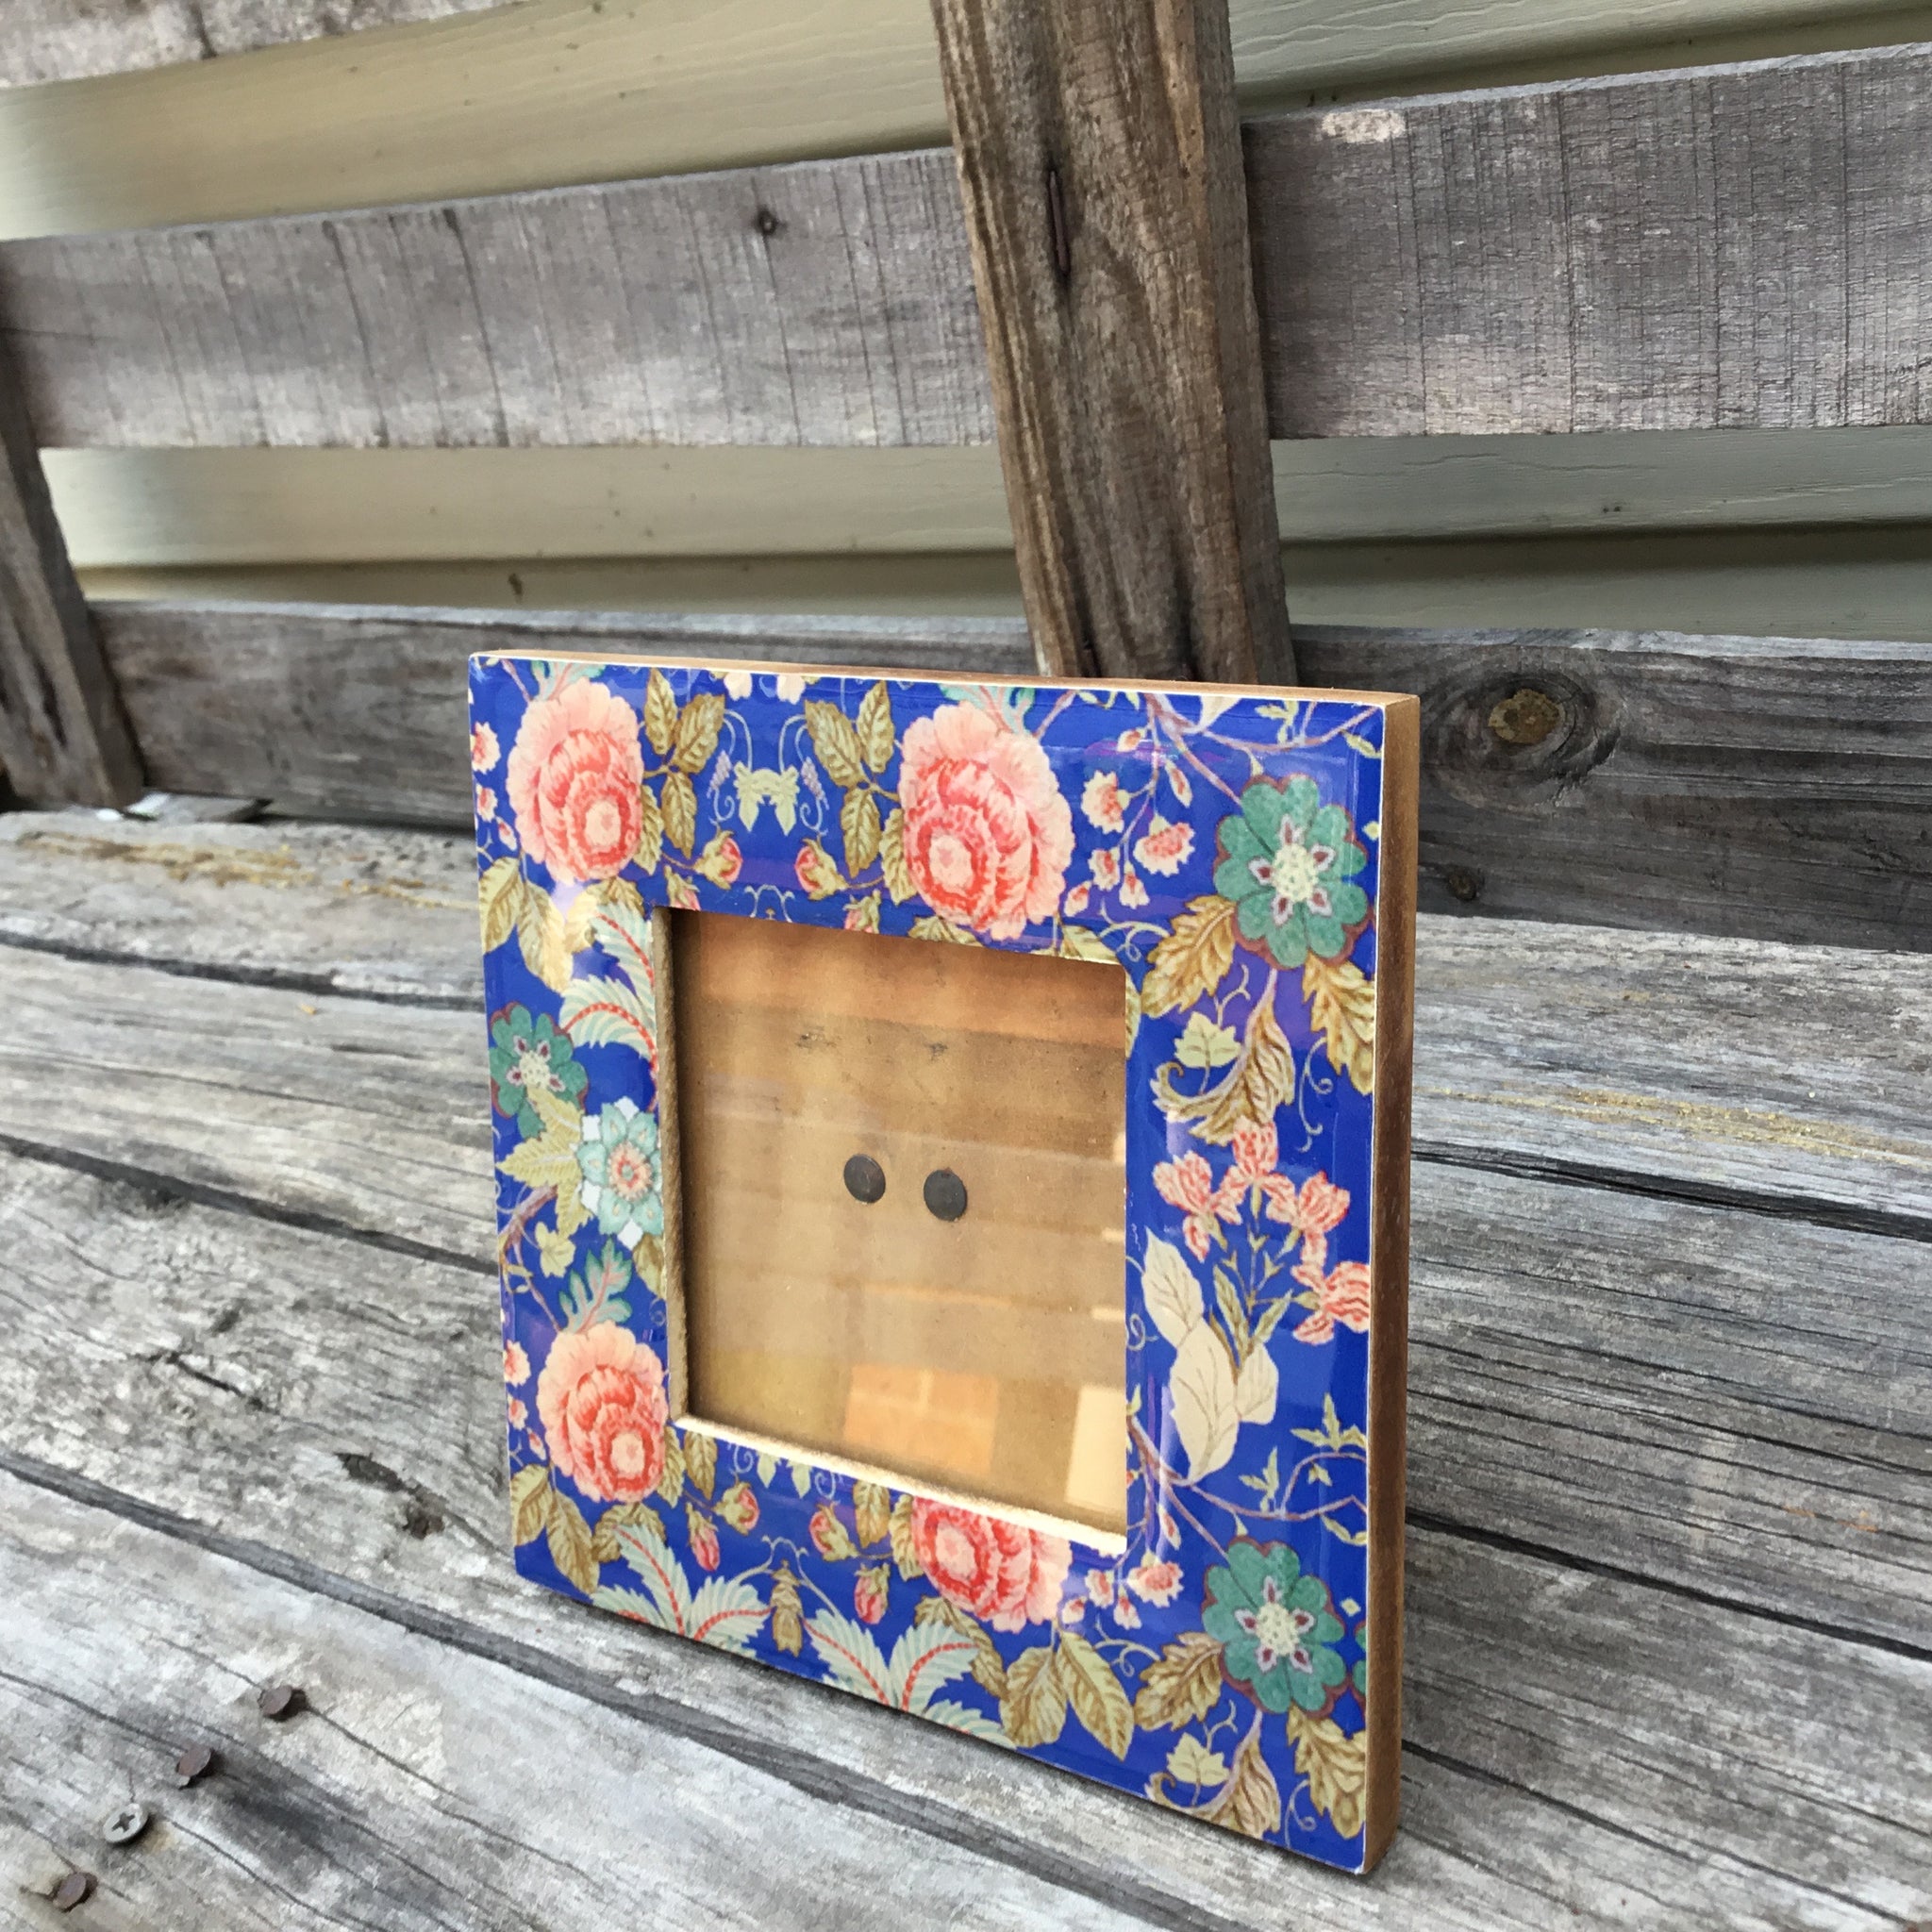 Fair Trade Ethical Resin and Wood Photo Frame Flower Design